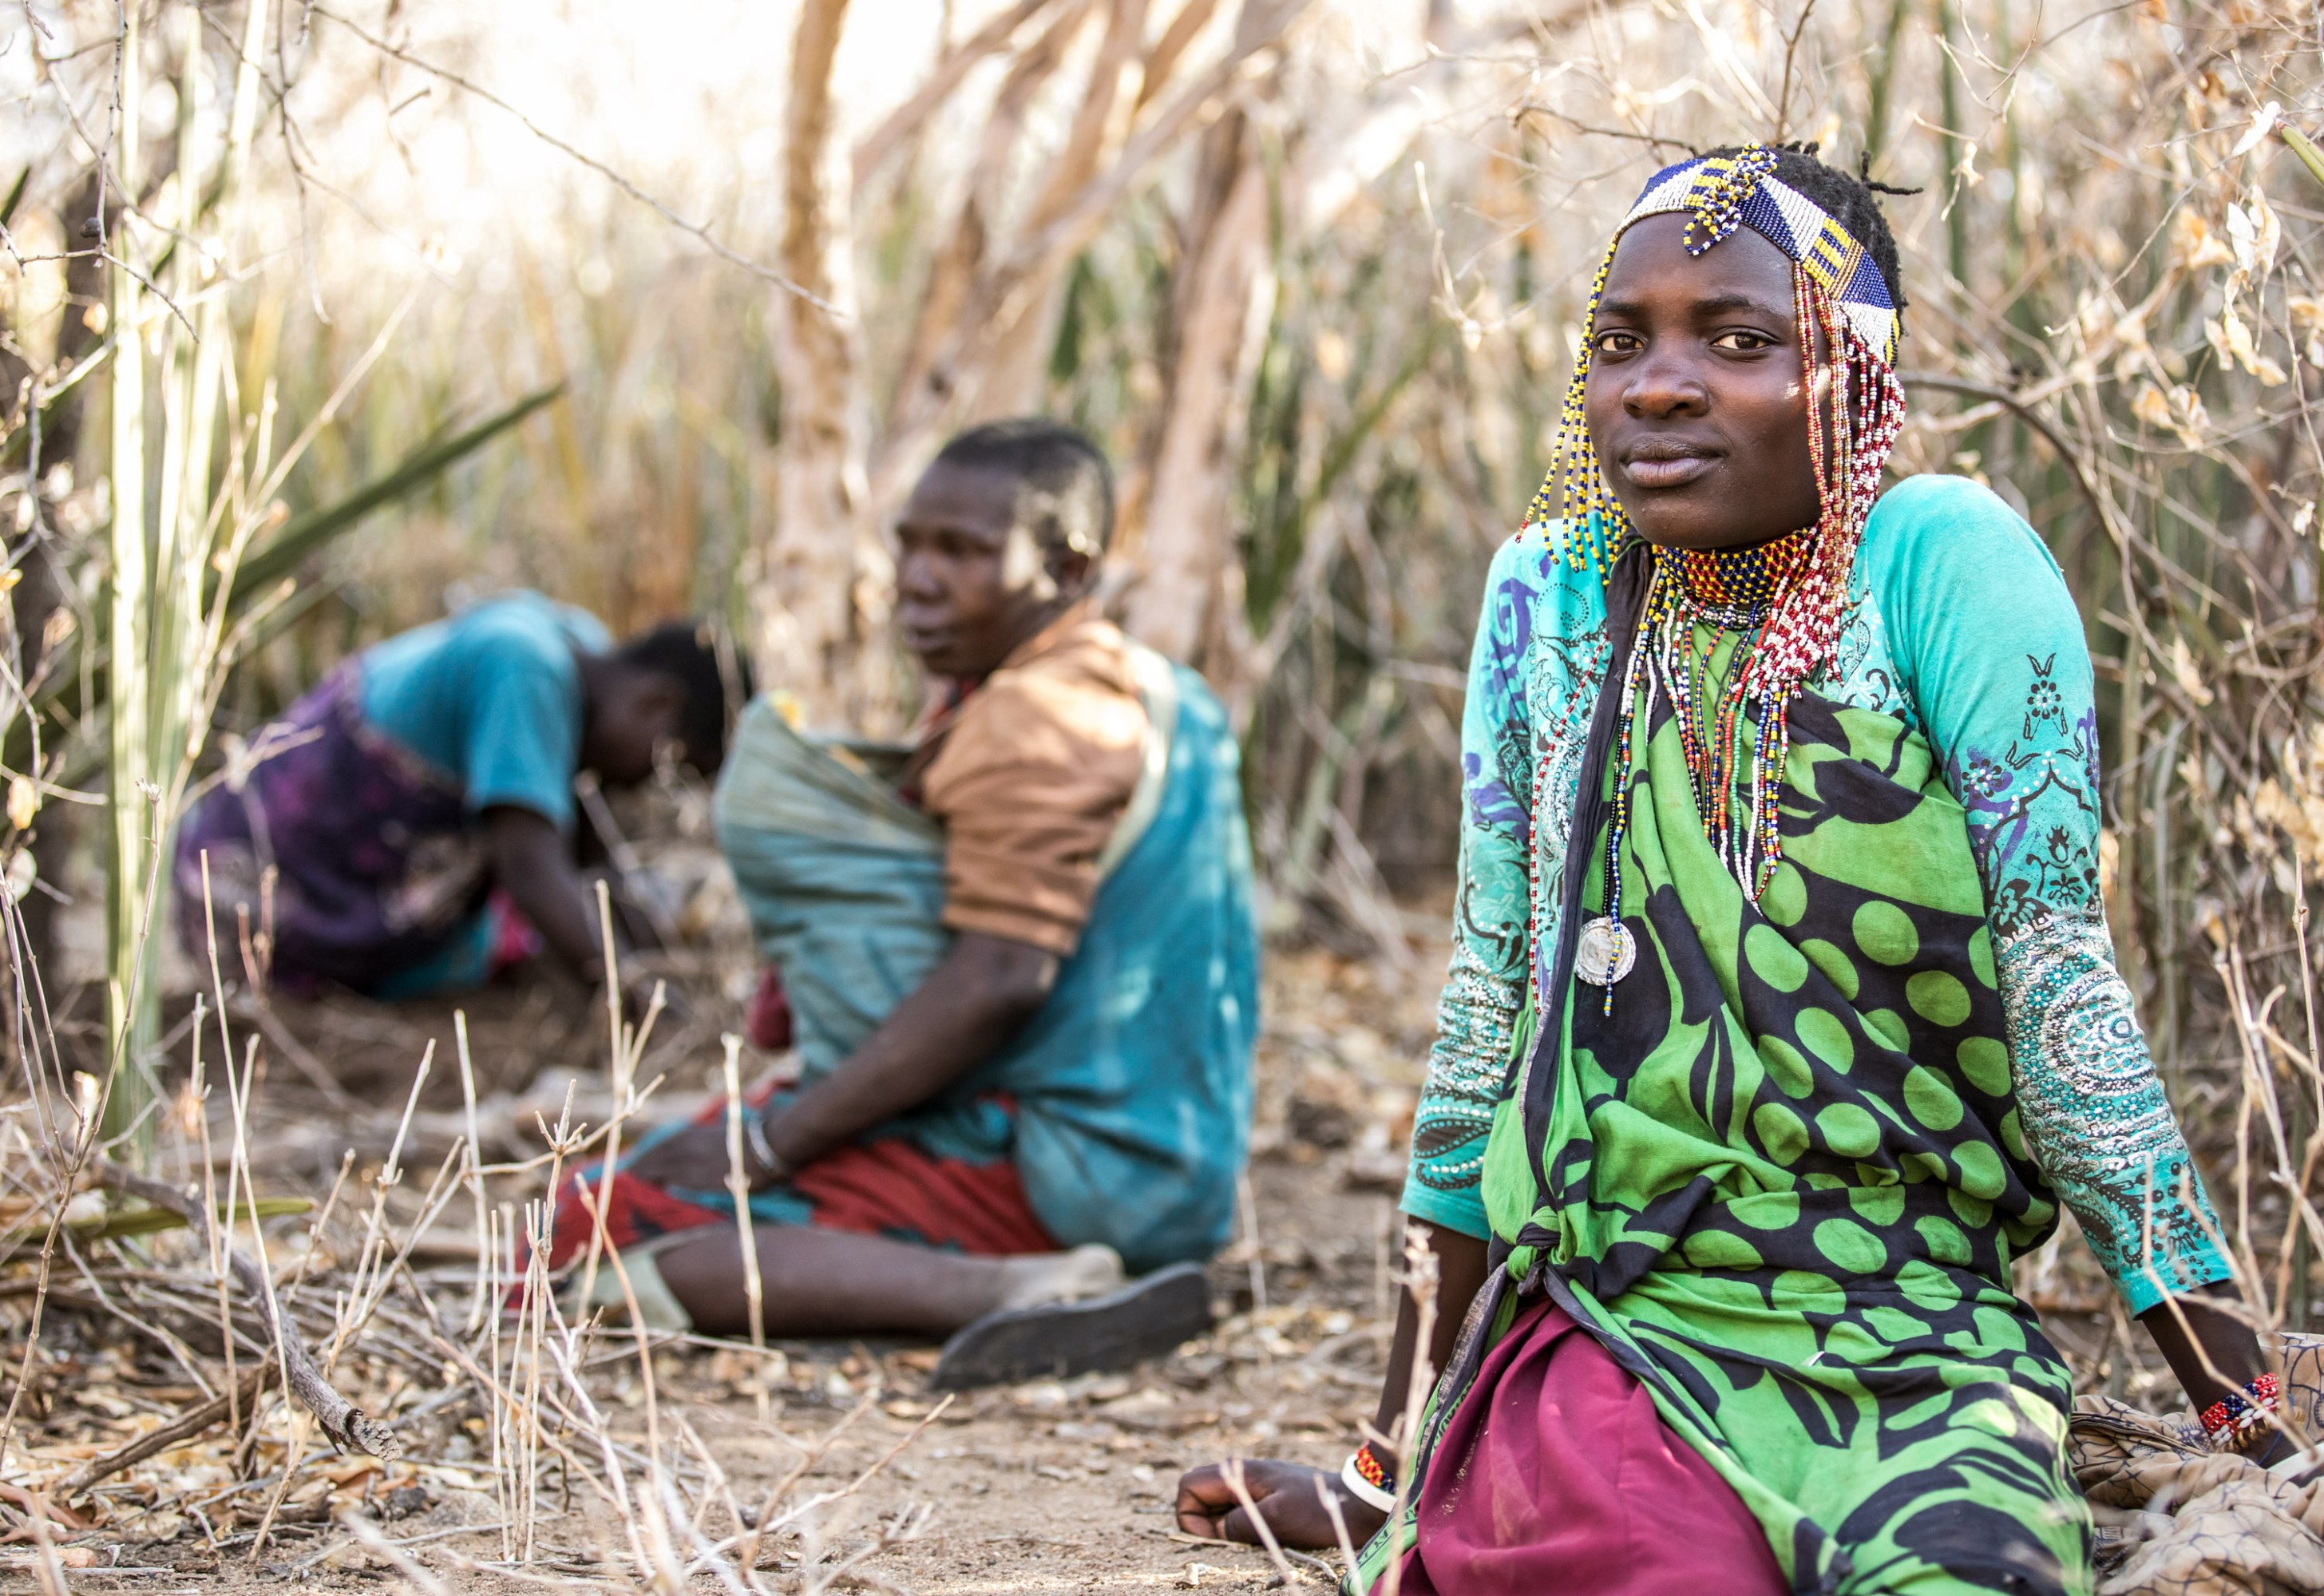 Hadza women sitting on the ground in the tall grass